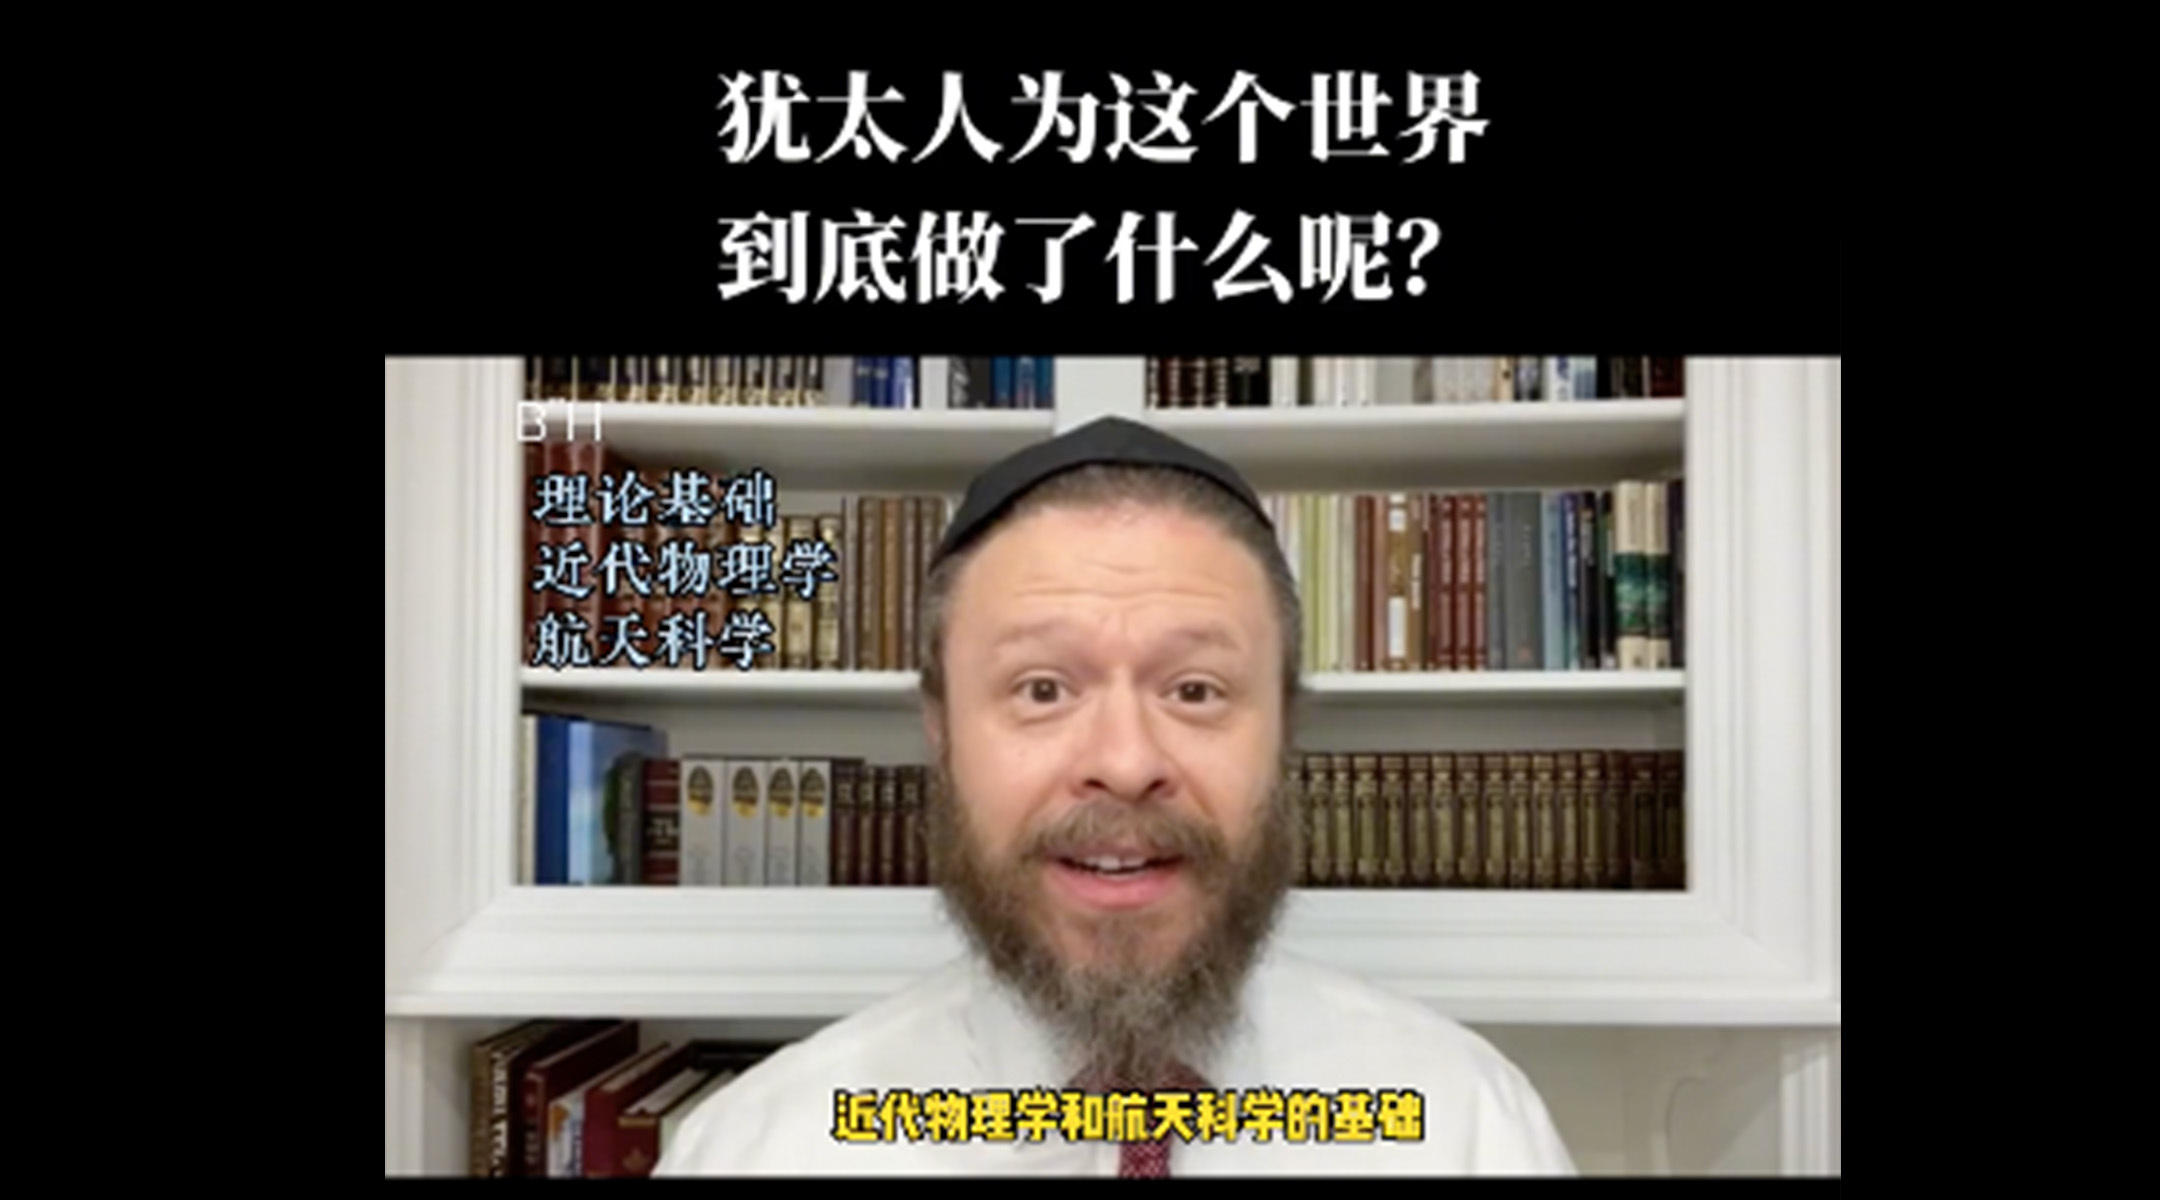 In a video for Douyin, China’s version of TikTok, Rabbi Matt Trusch explains in Mandarin “what Jews have done for the world.” (Courtesy)